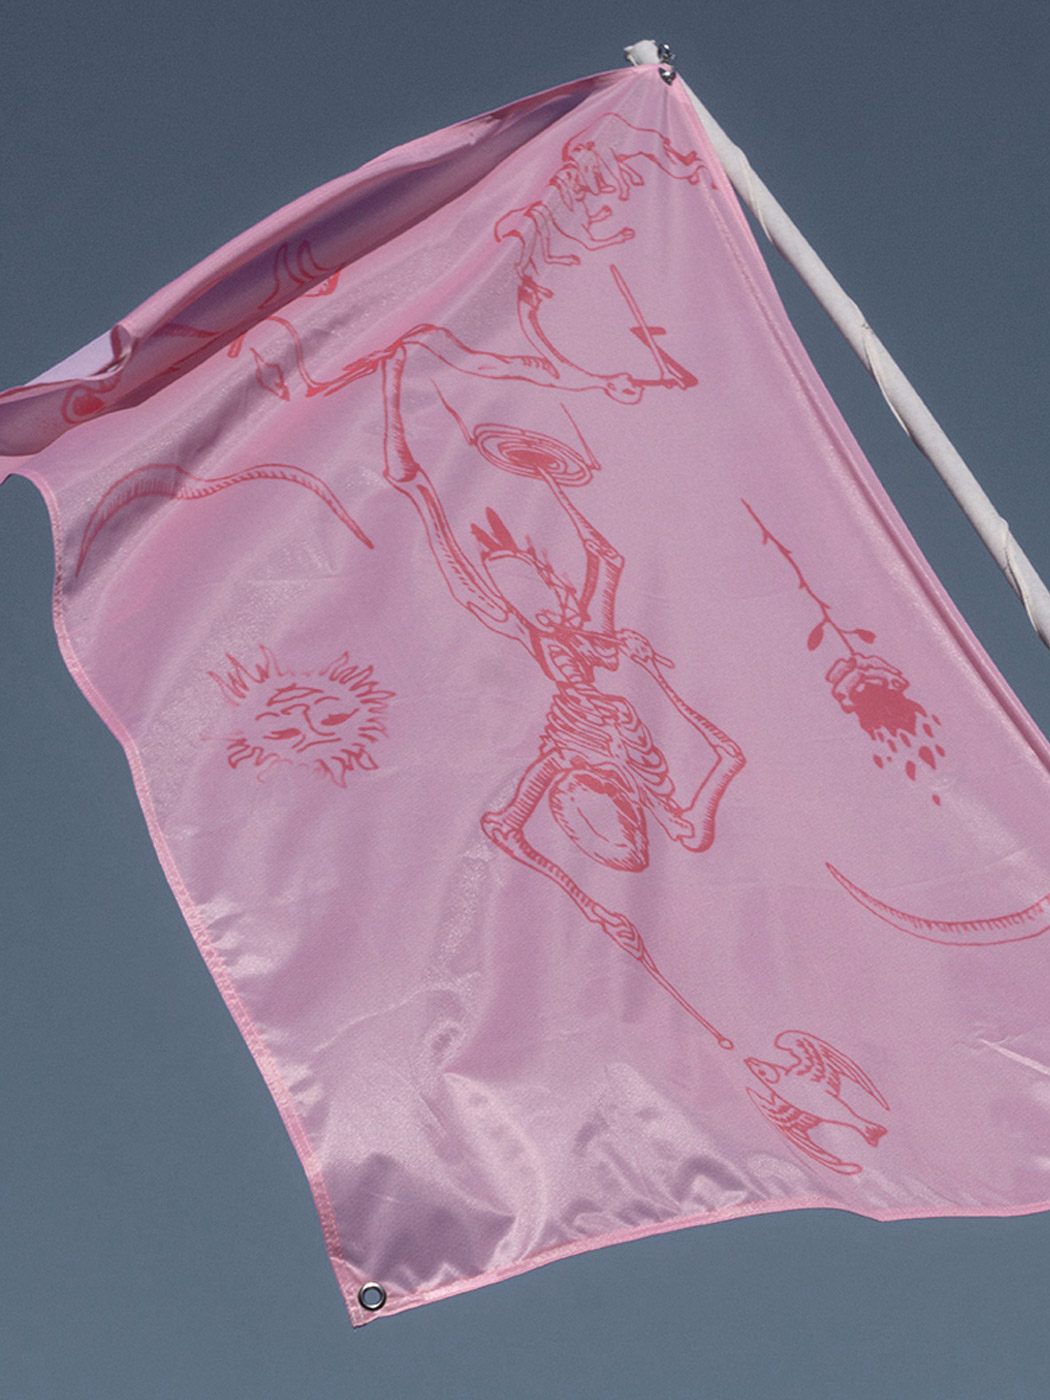 A pink flag with a red print. The print shows a quote from Holbeins' Images of Death, with the drumming skeleton wearing a prosthetic leg. There is also a burning rose, a laughing sun, a quotation from Master E.S. of two dogs wrestling over a bone, a flying fish and an unidentifiable quadruped with offspring.